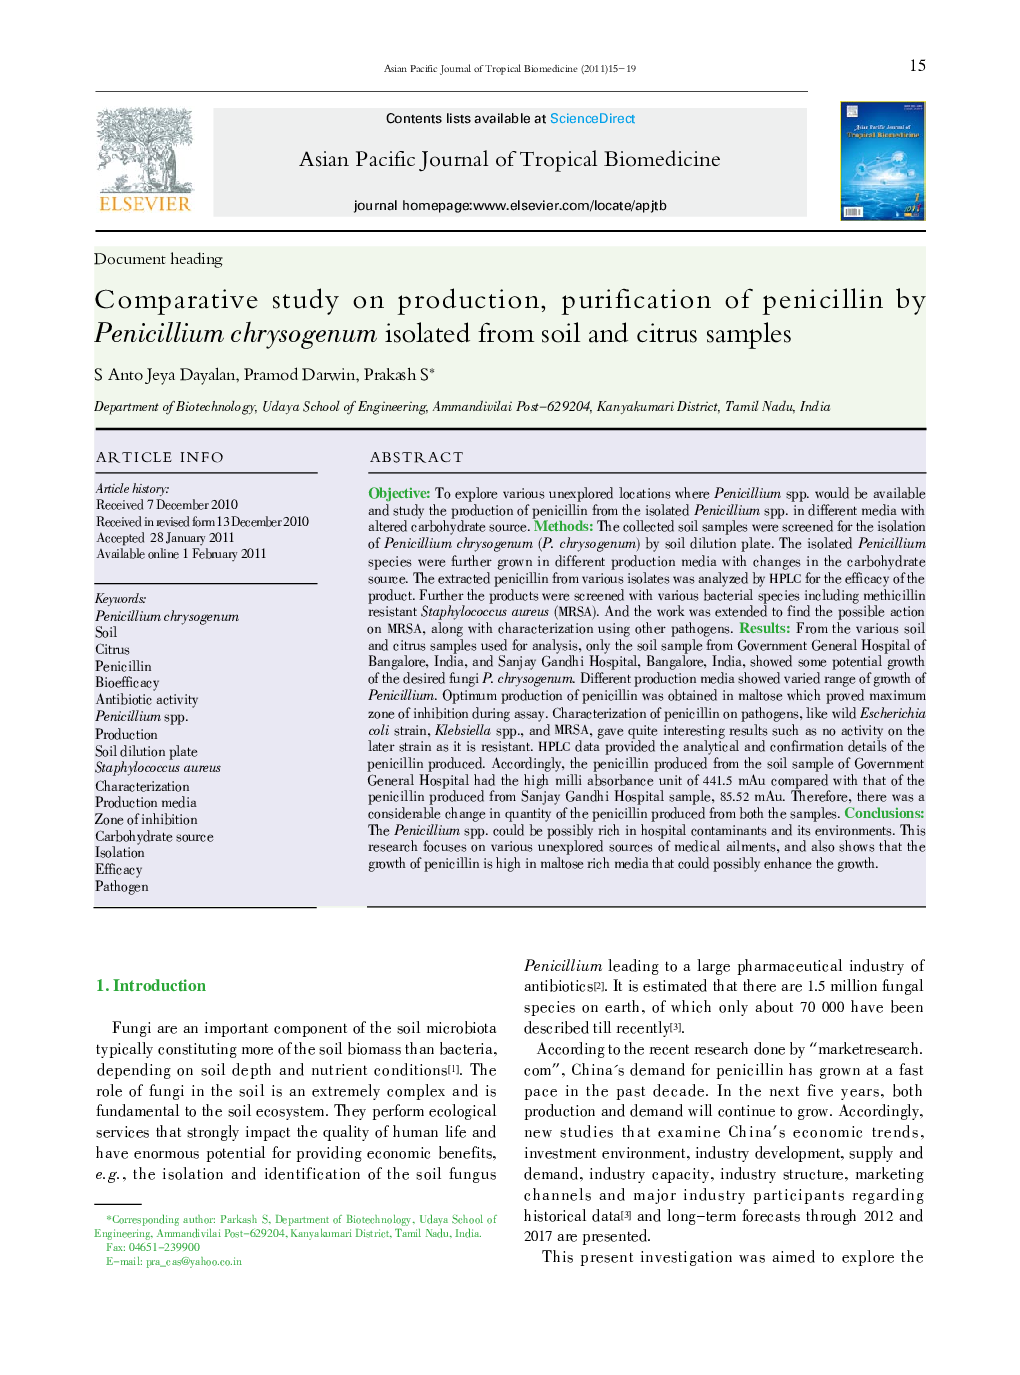 Comparative study on production, purification of penicillin by Penicillium chrysogenum isolated from soil and citrus samples